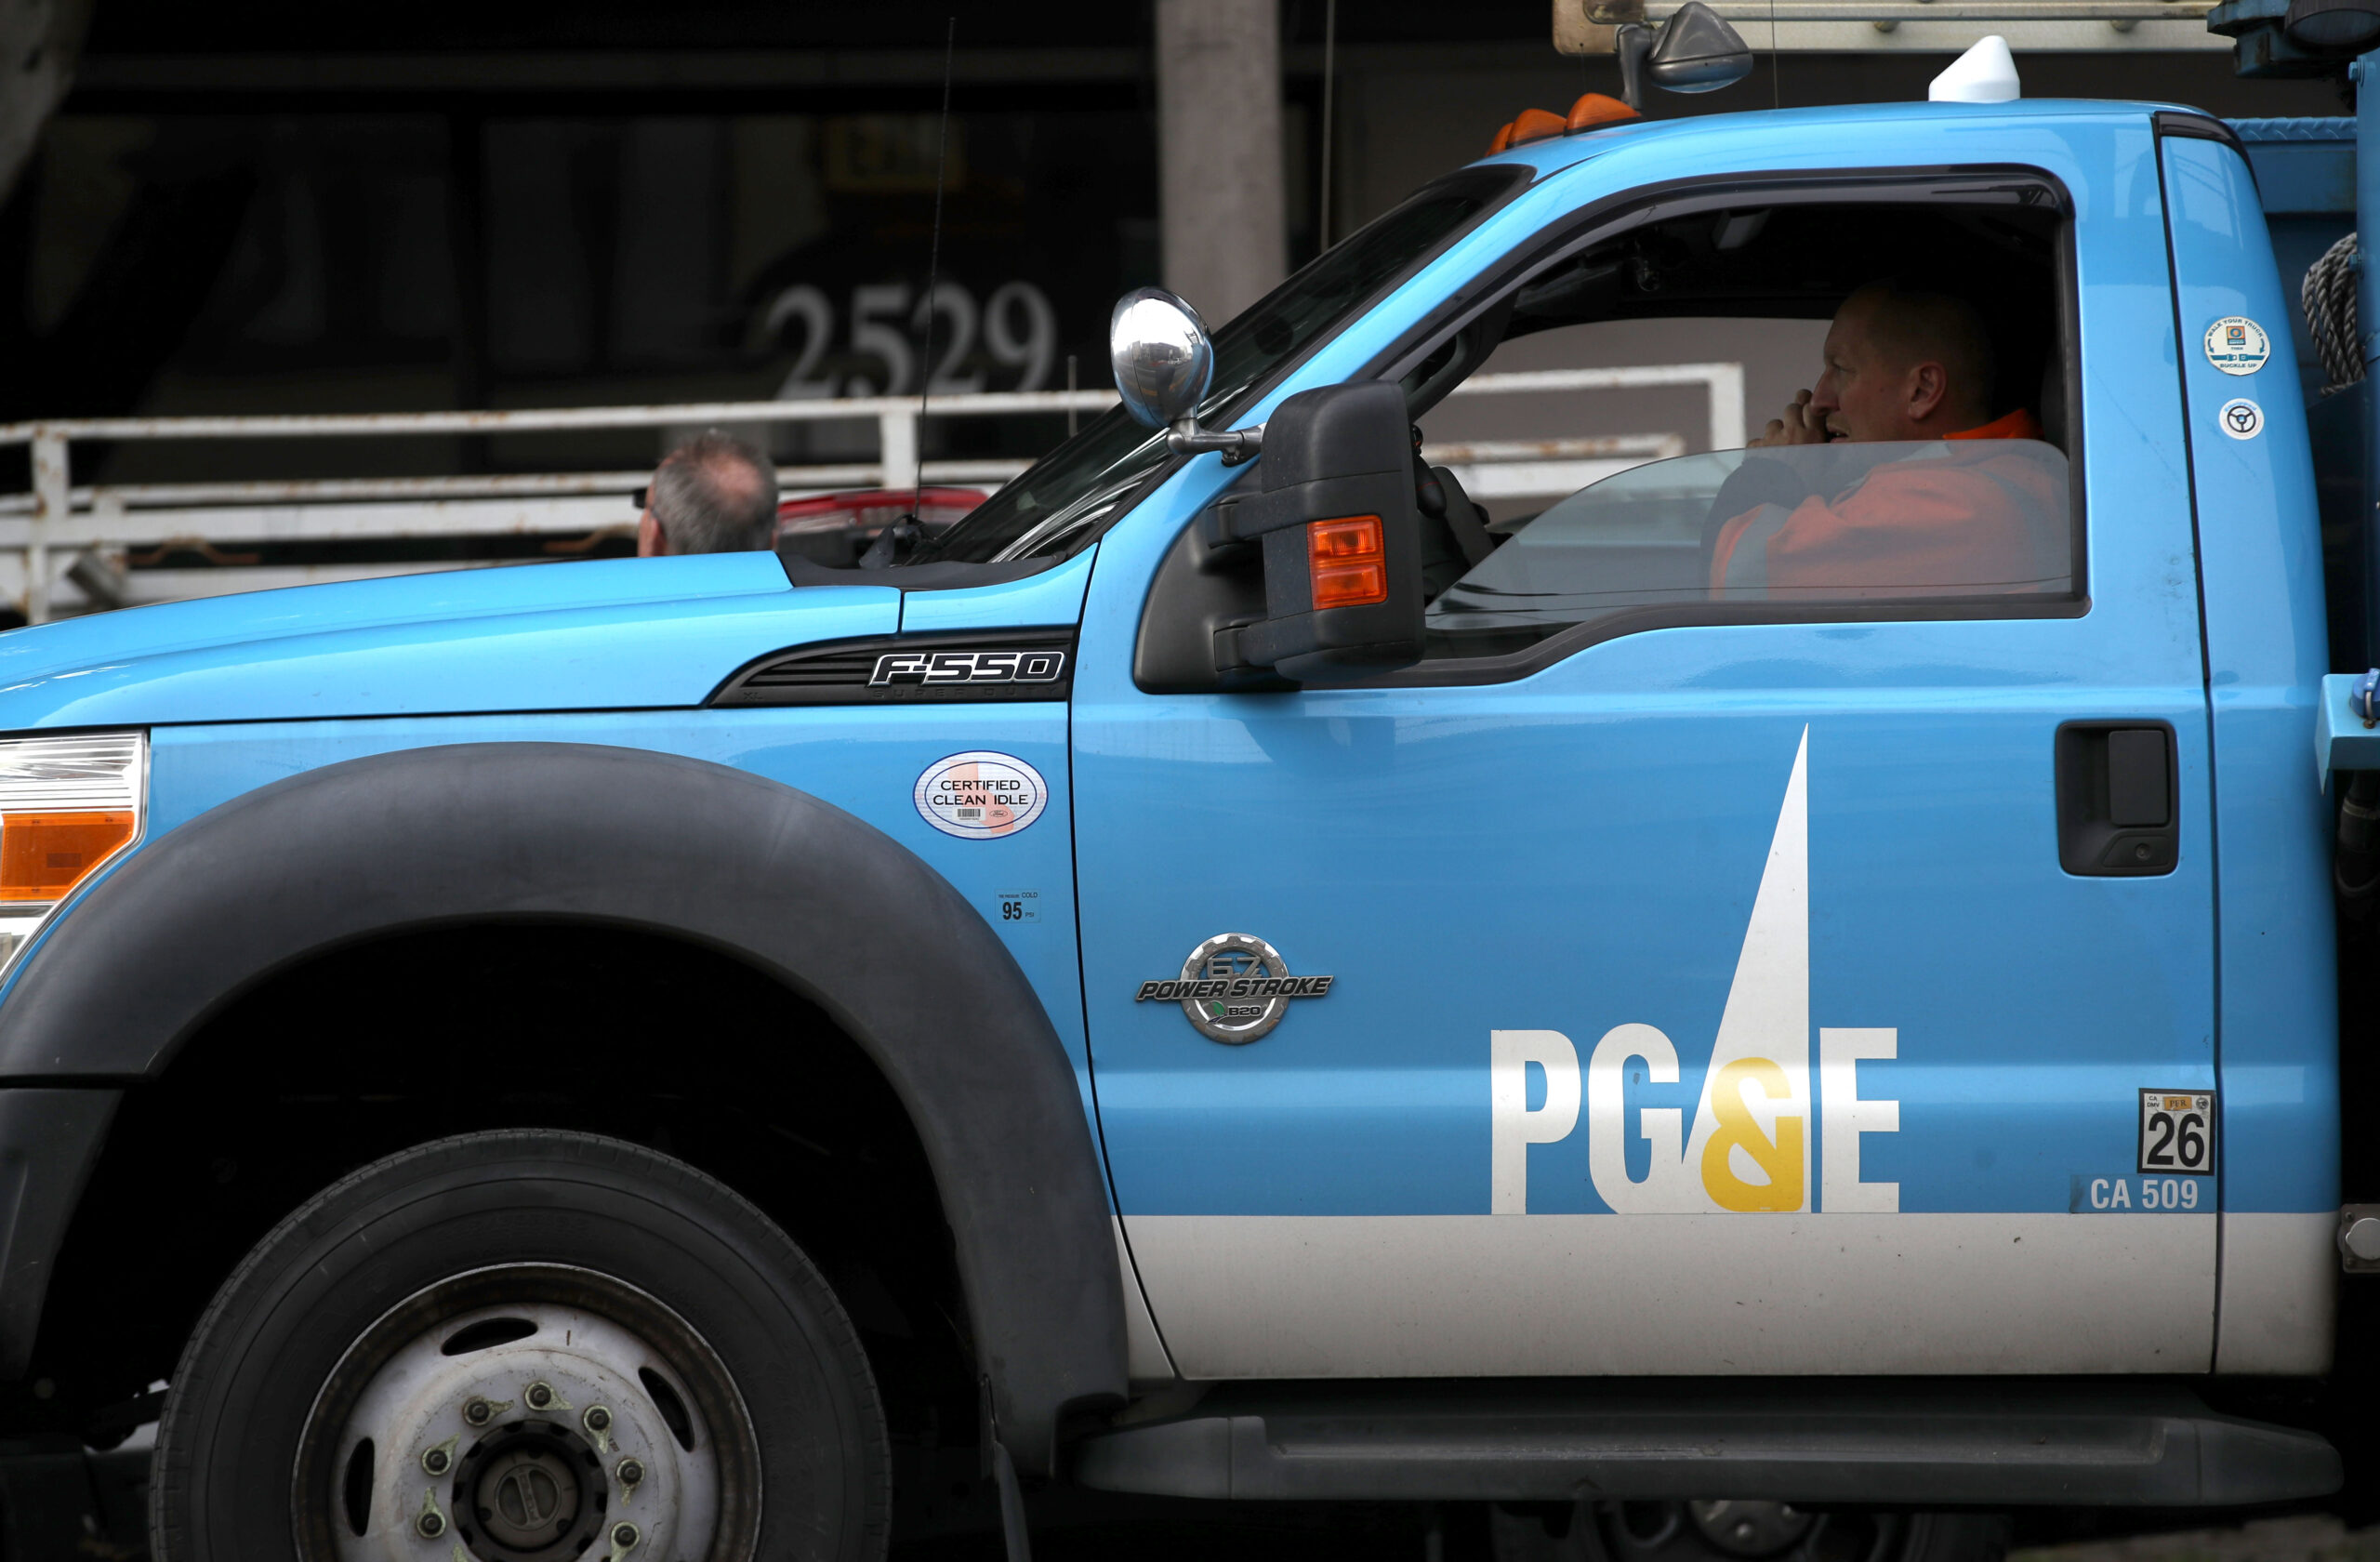 PG&E Wants to Raise Rates. How Bad Will It Be?